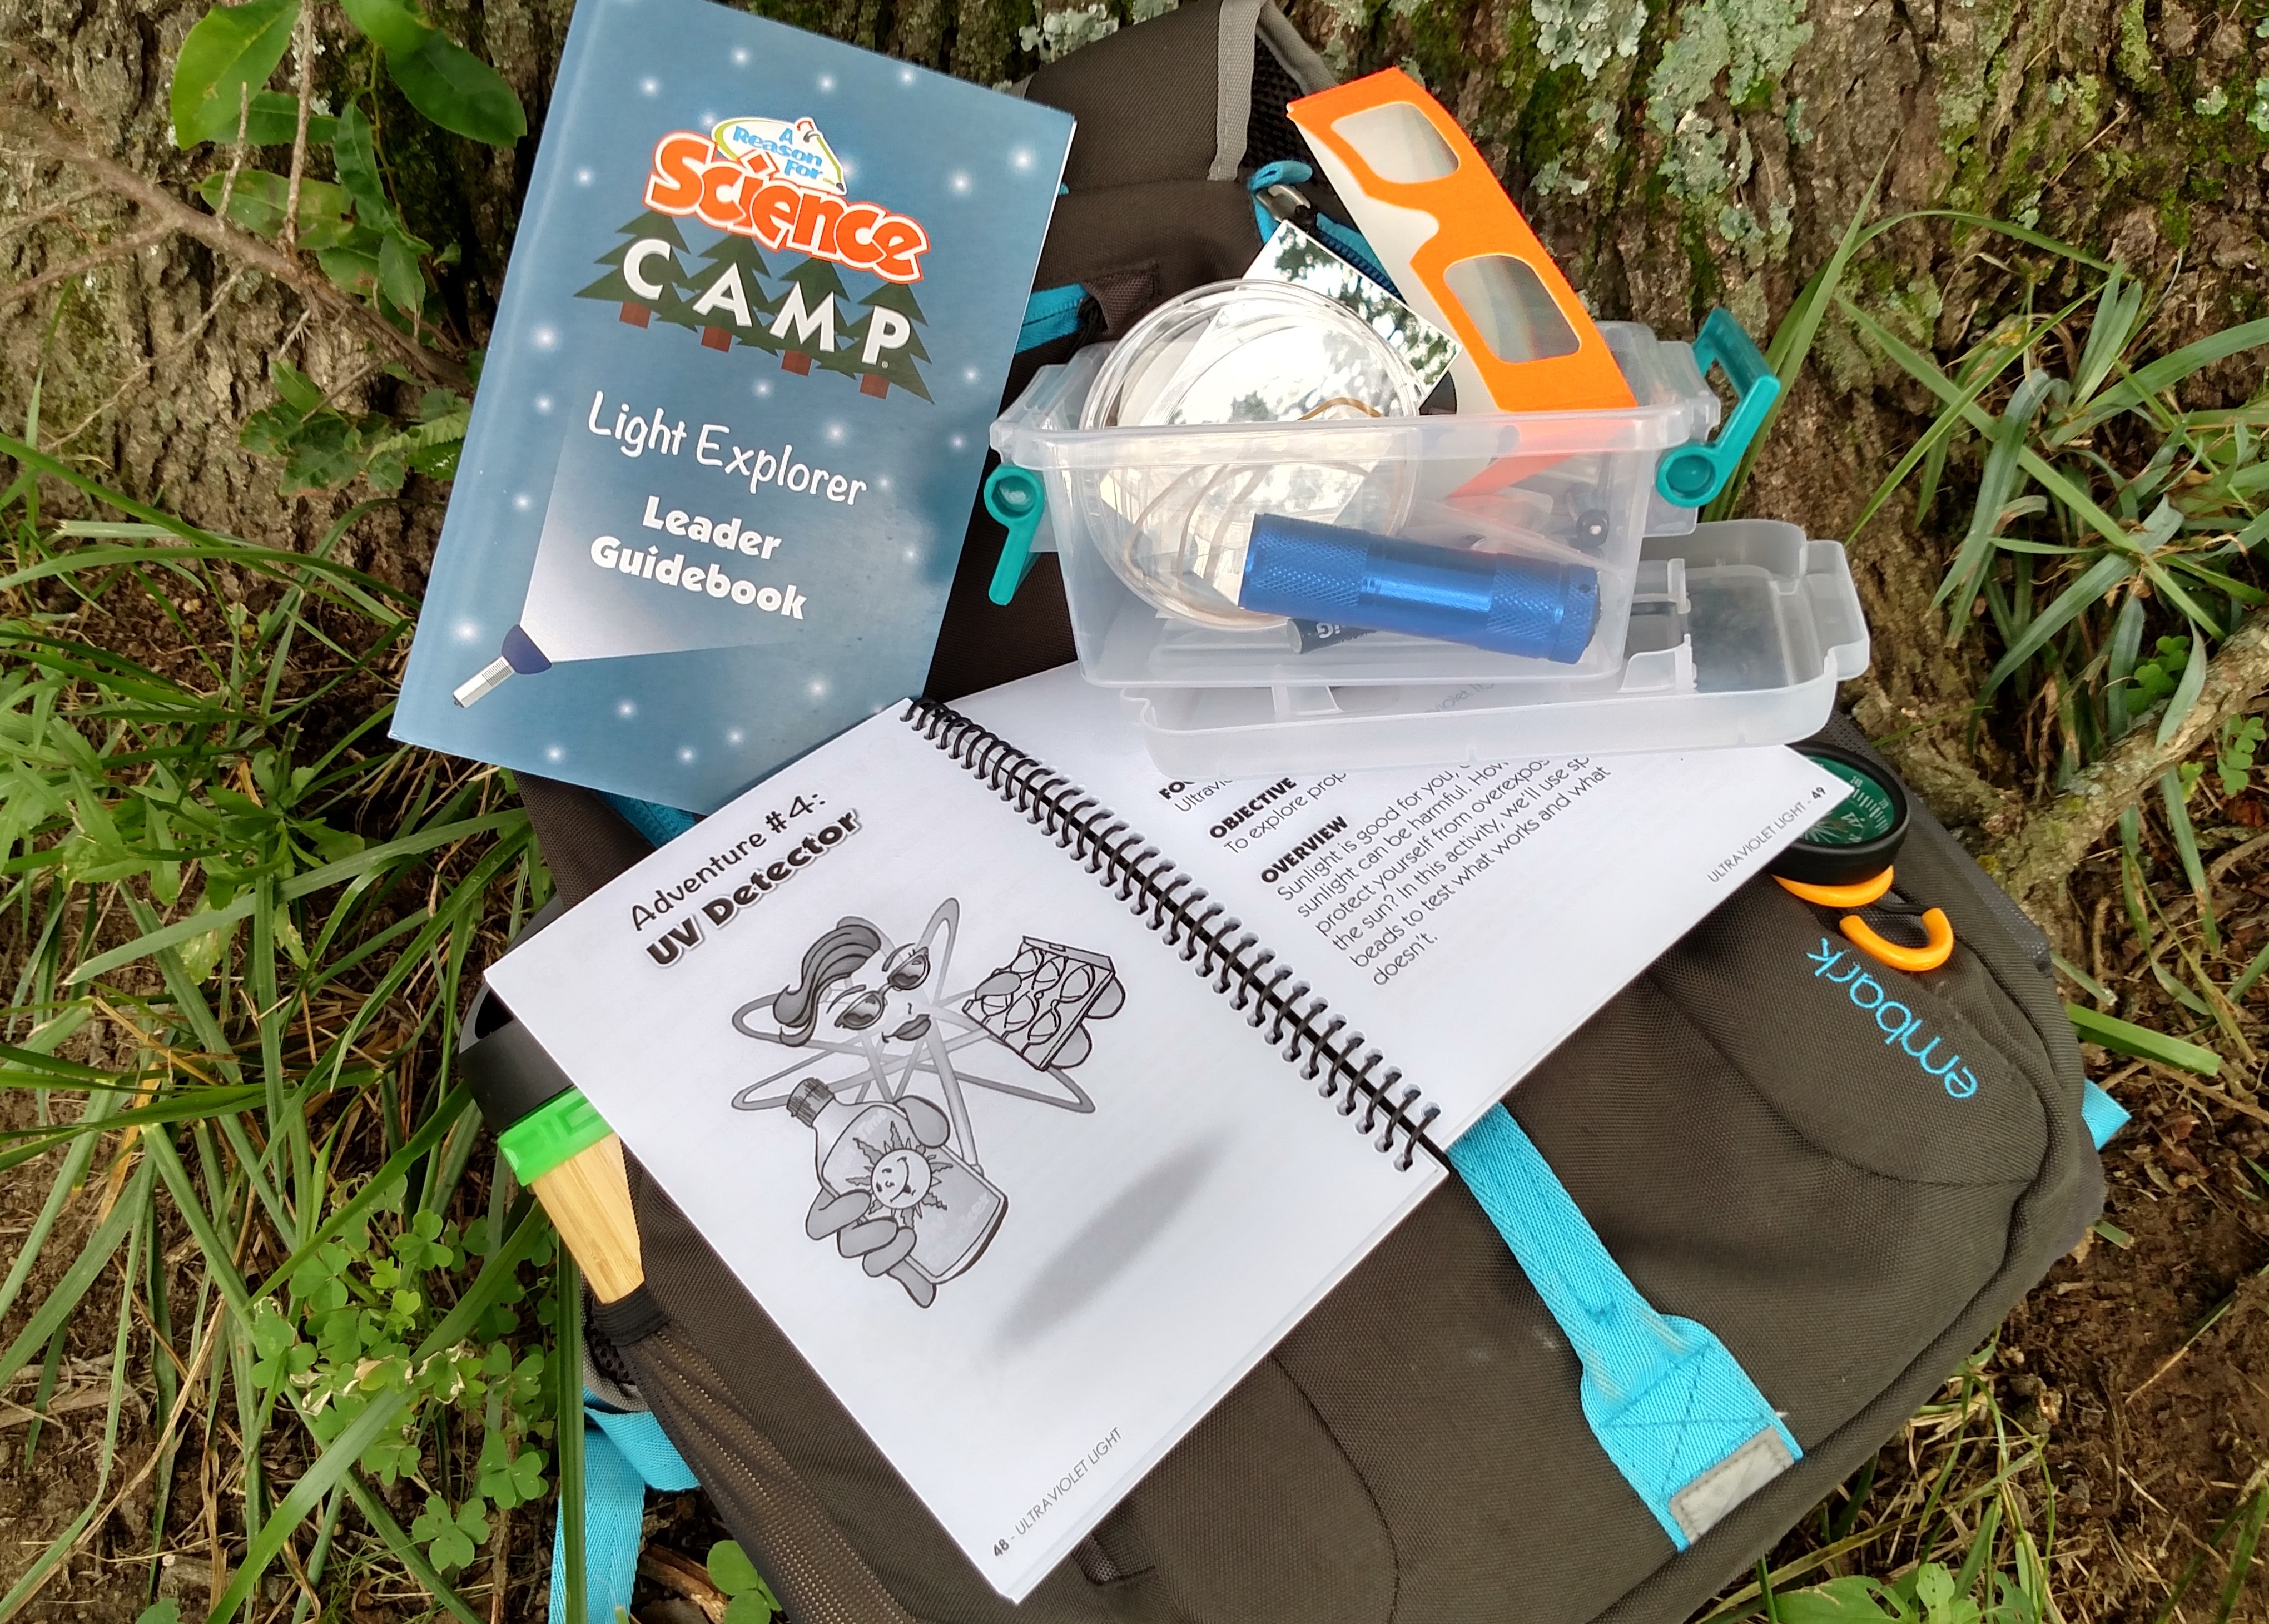 A Reason For Science Camp: Light Explorer kit